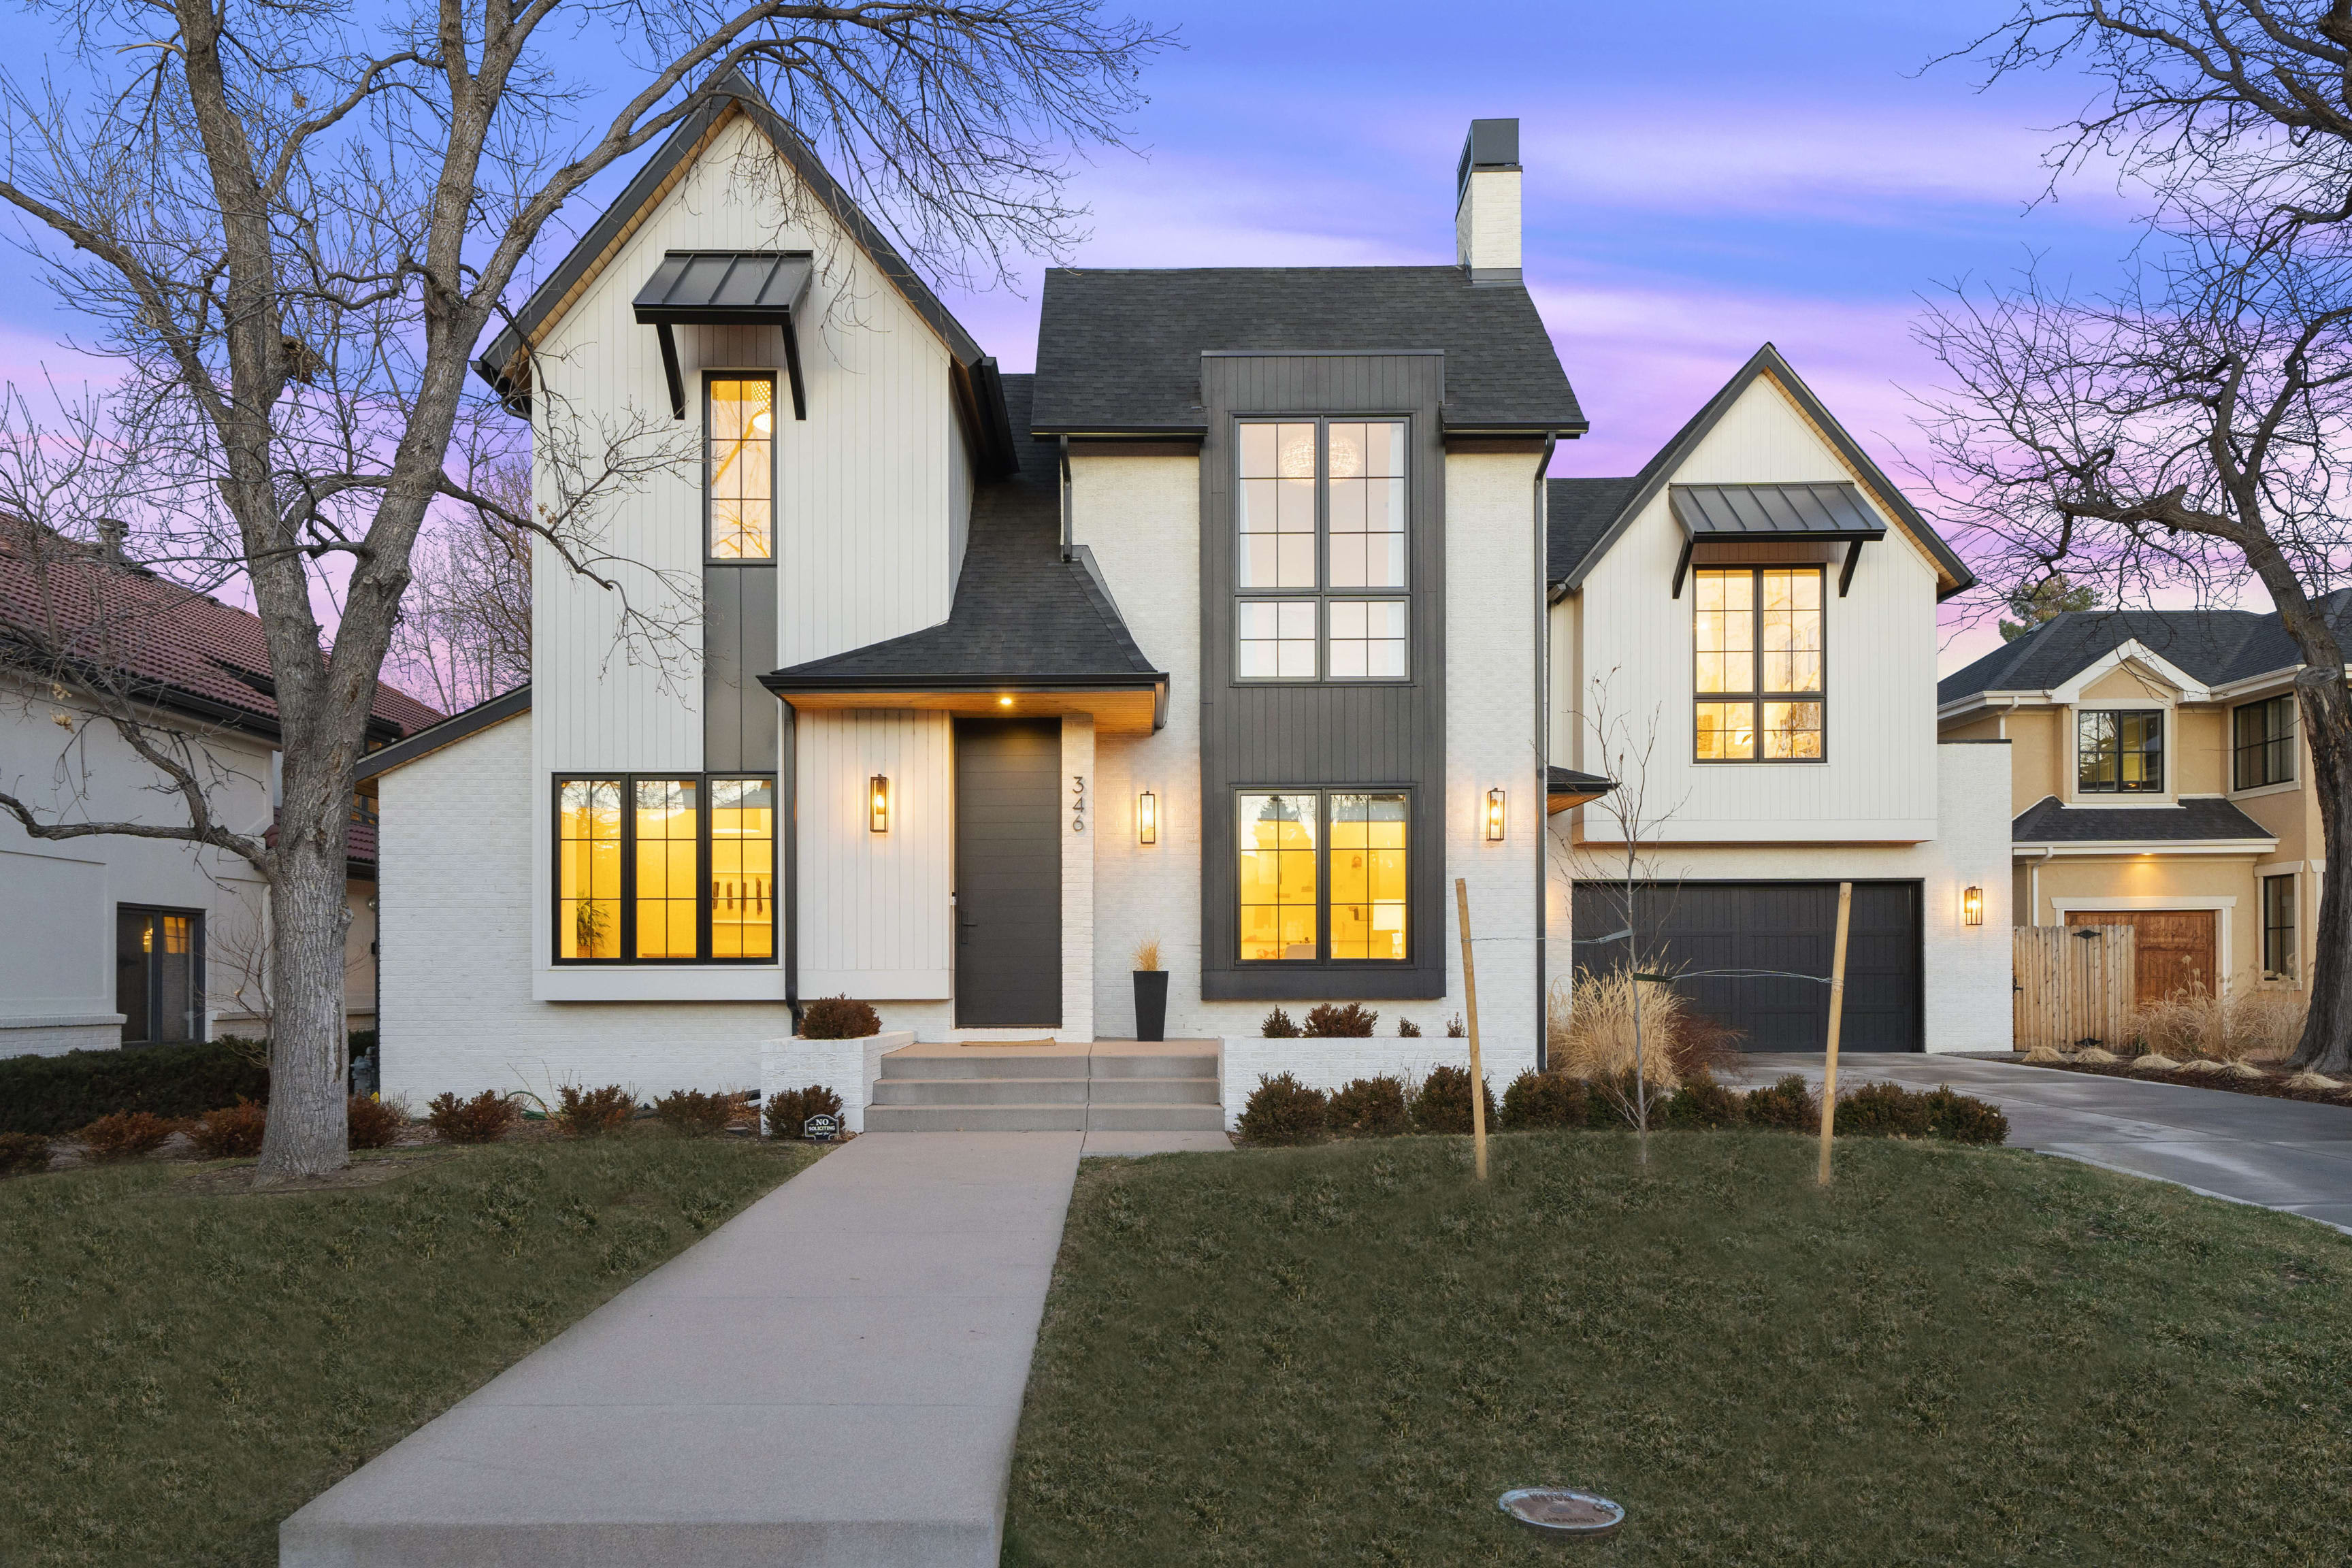  Dusk falls on a modern luxury home with striking architecture, warm interior lights, and a welcoming ambiance.